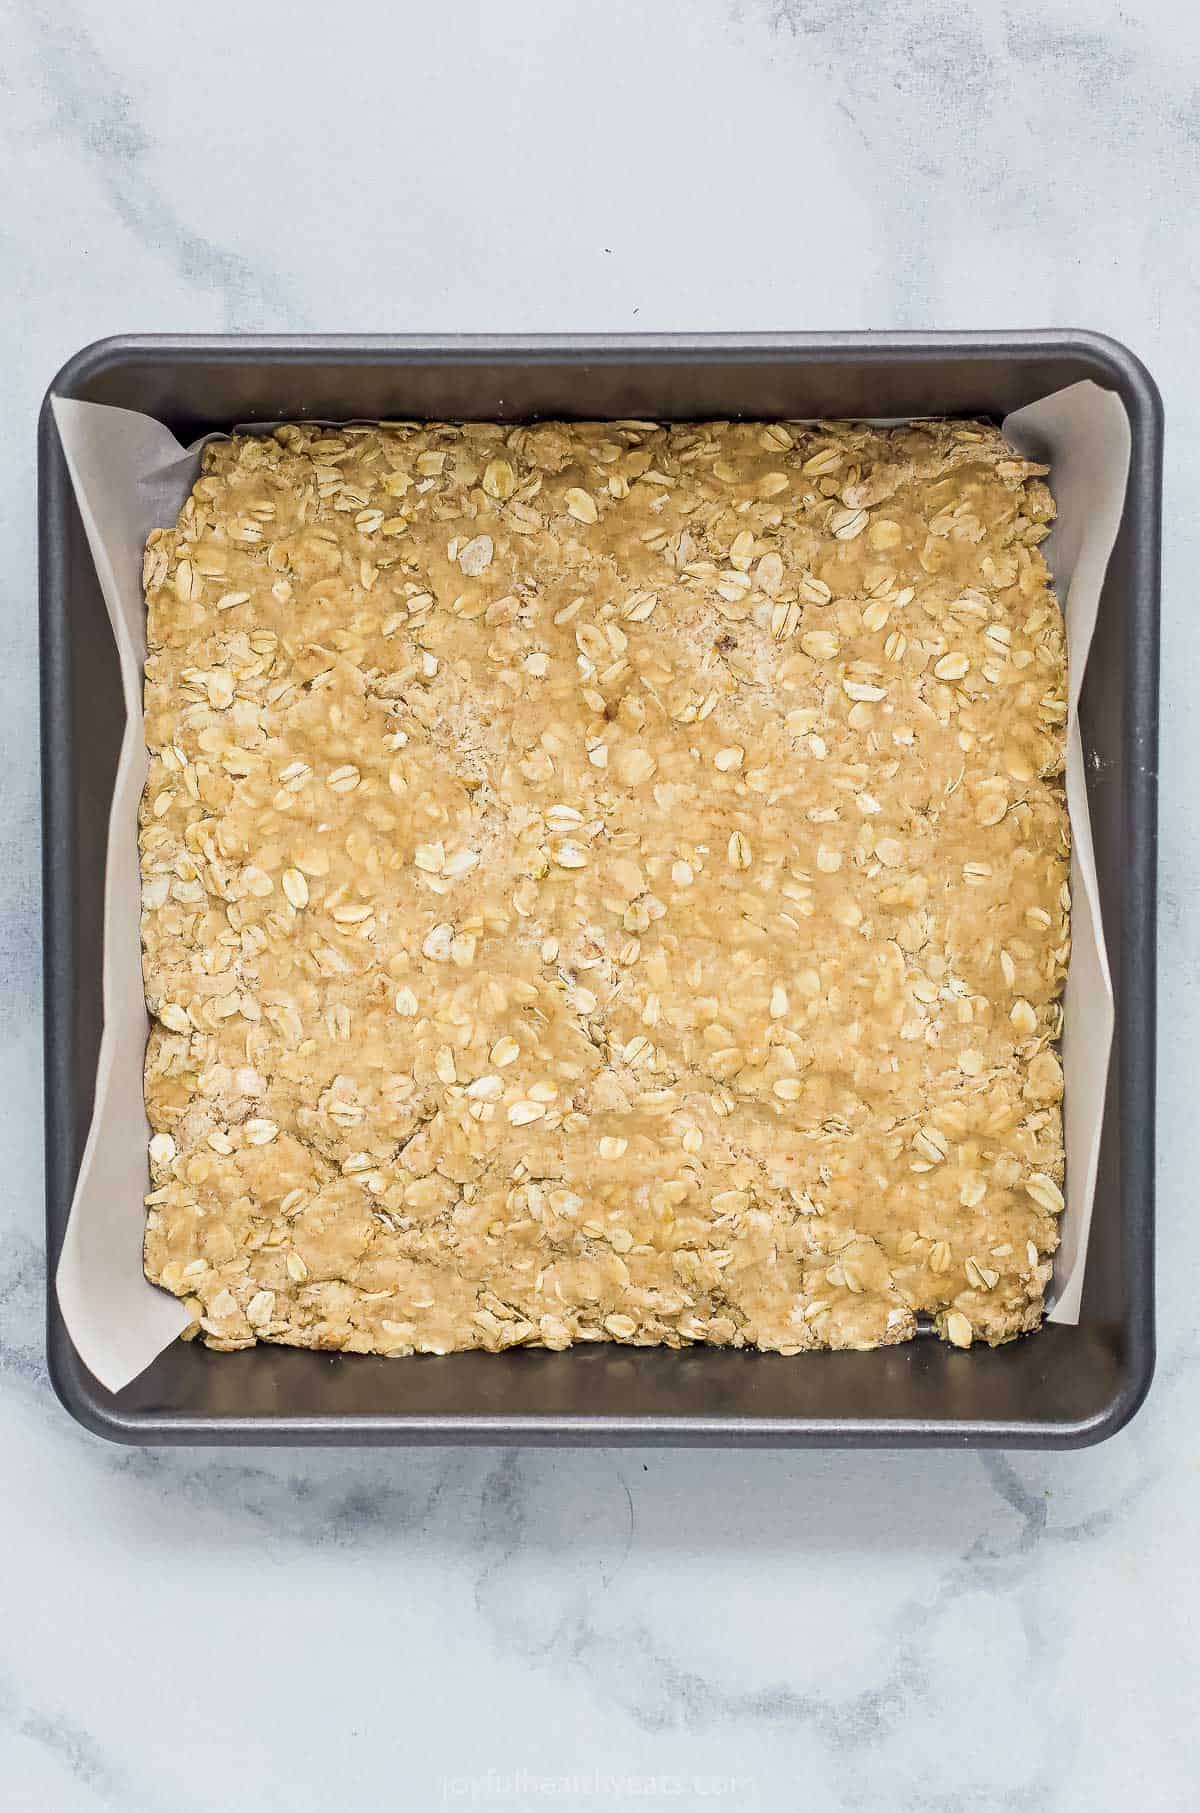 The oatmeal mixture pressed into a square pan lined with parchment paper